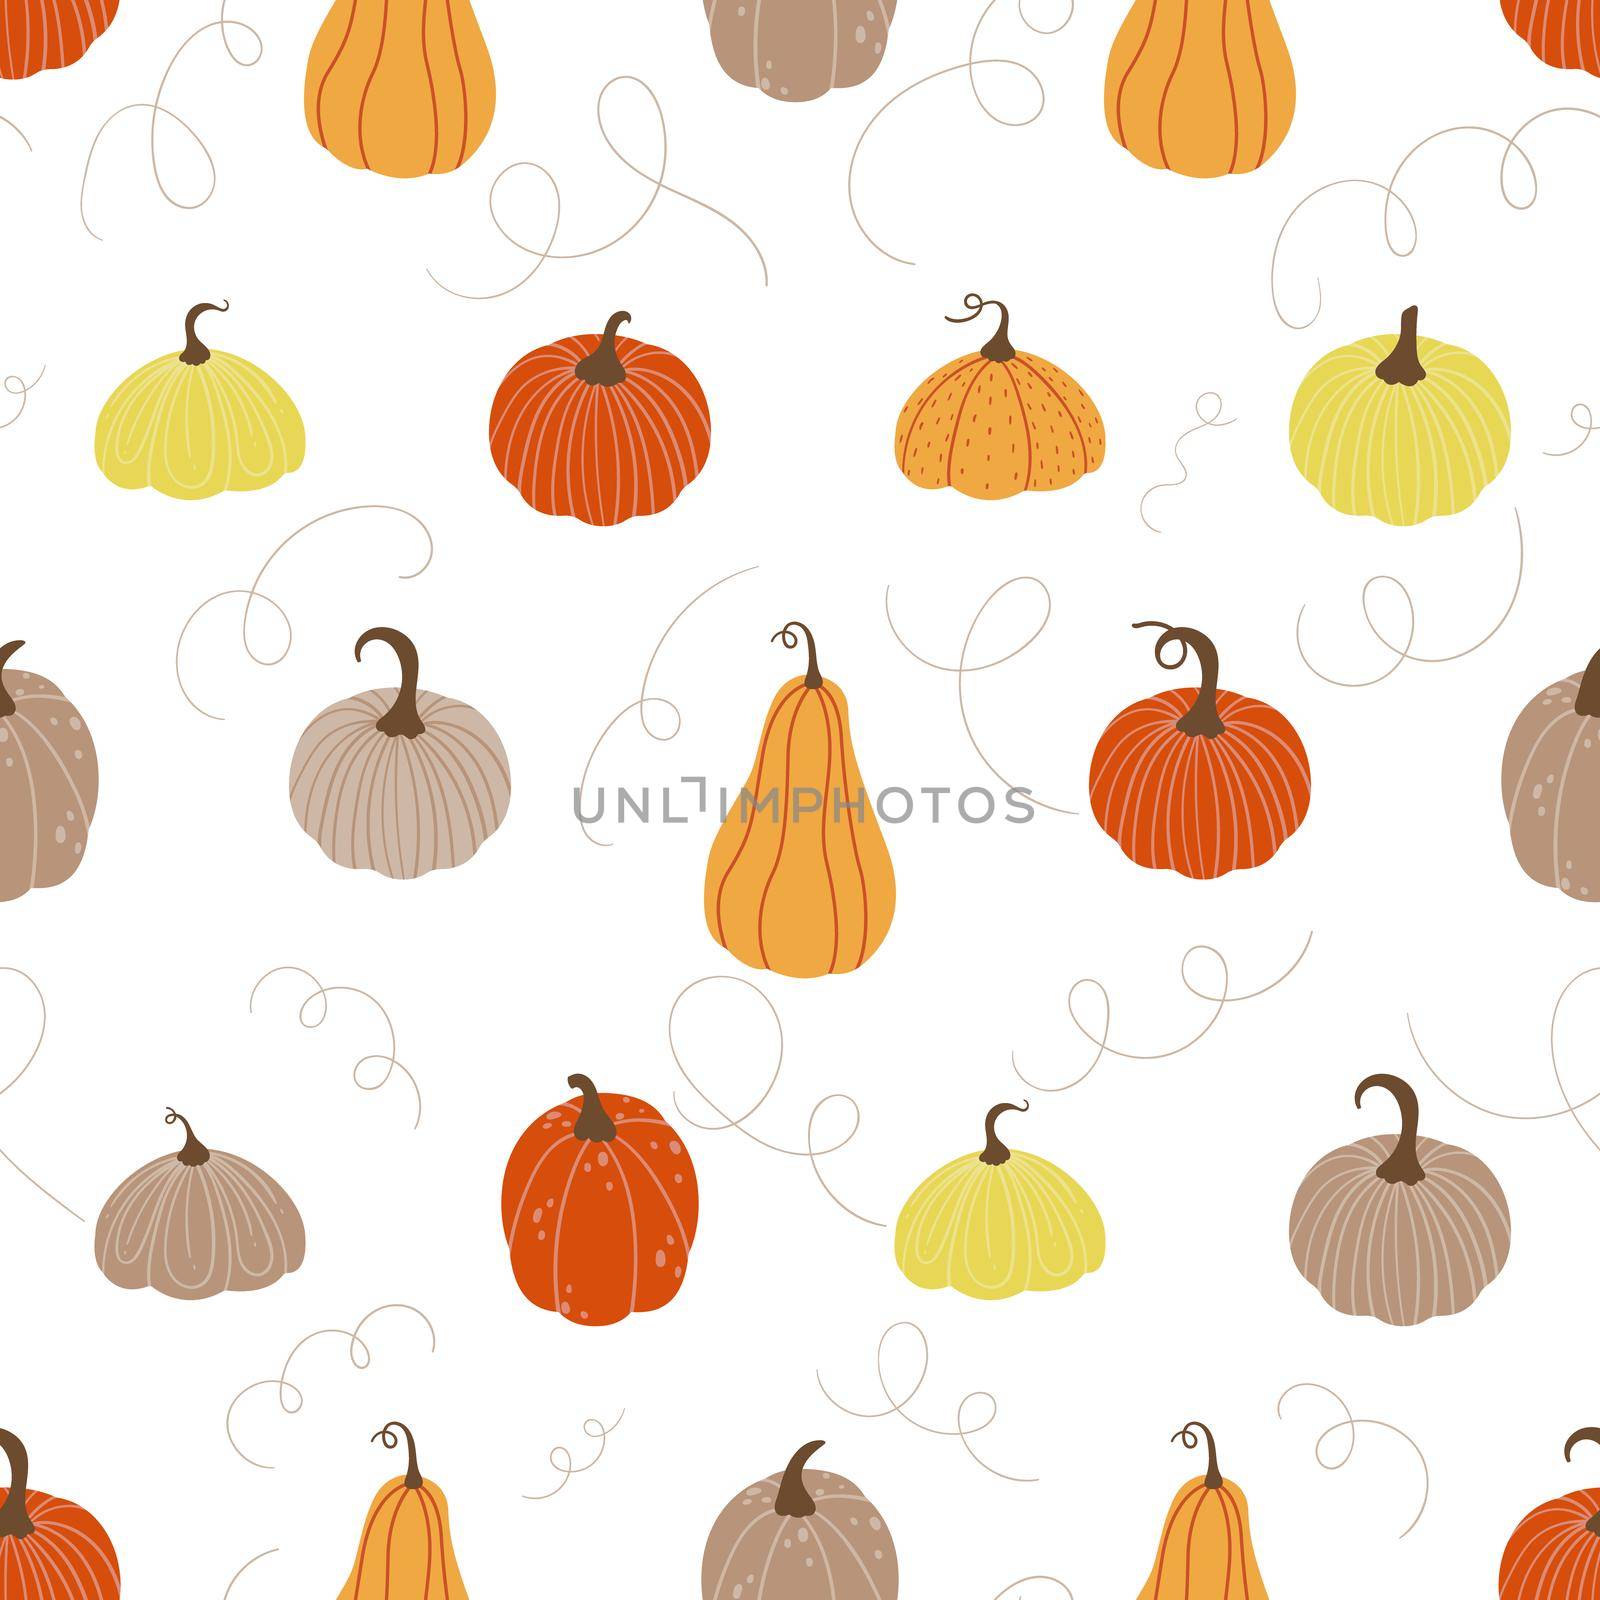 Seamless pattern. Various pumpkins in doodle style on a white background. by Lena_Khmelniuk